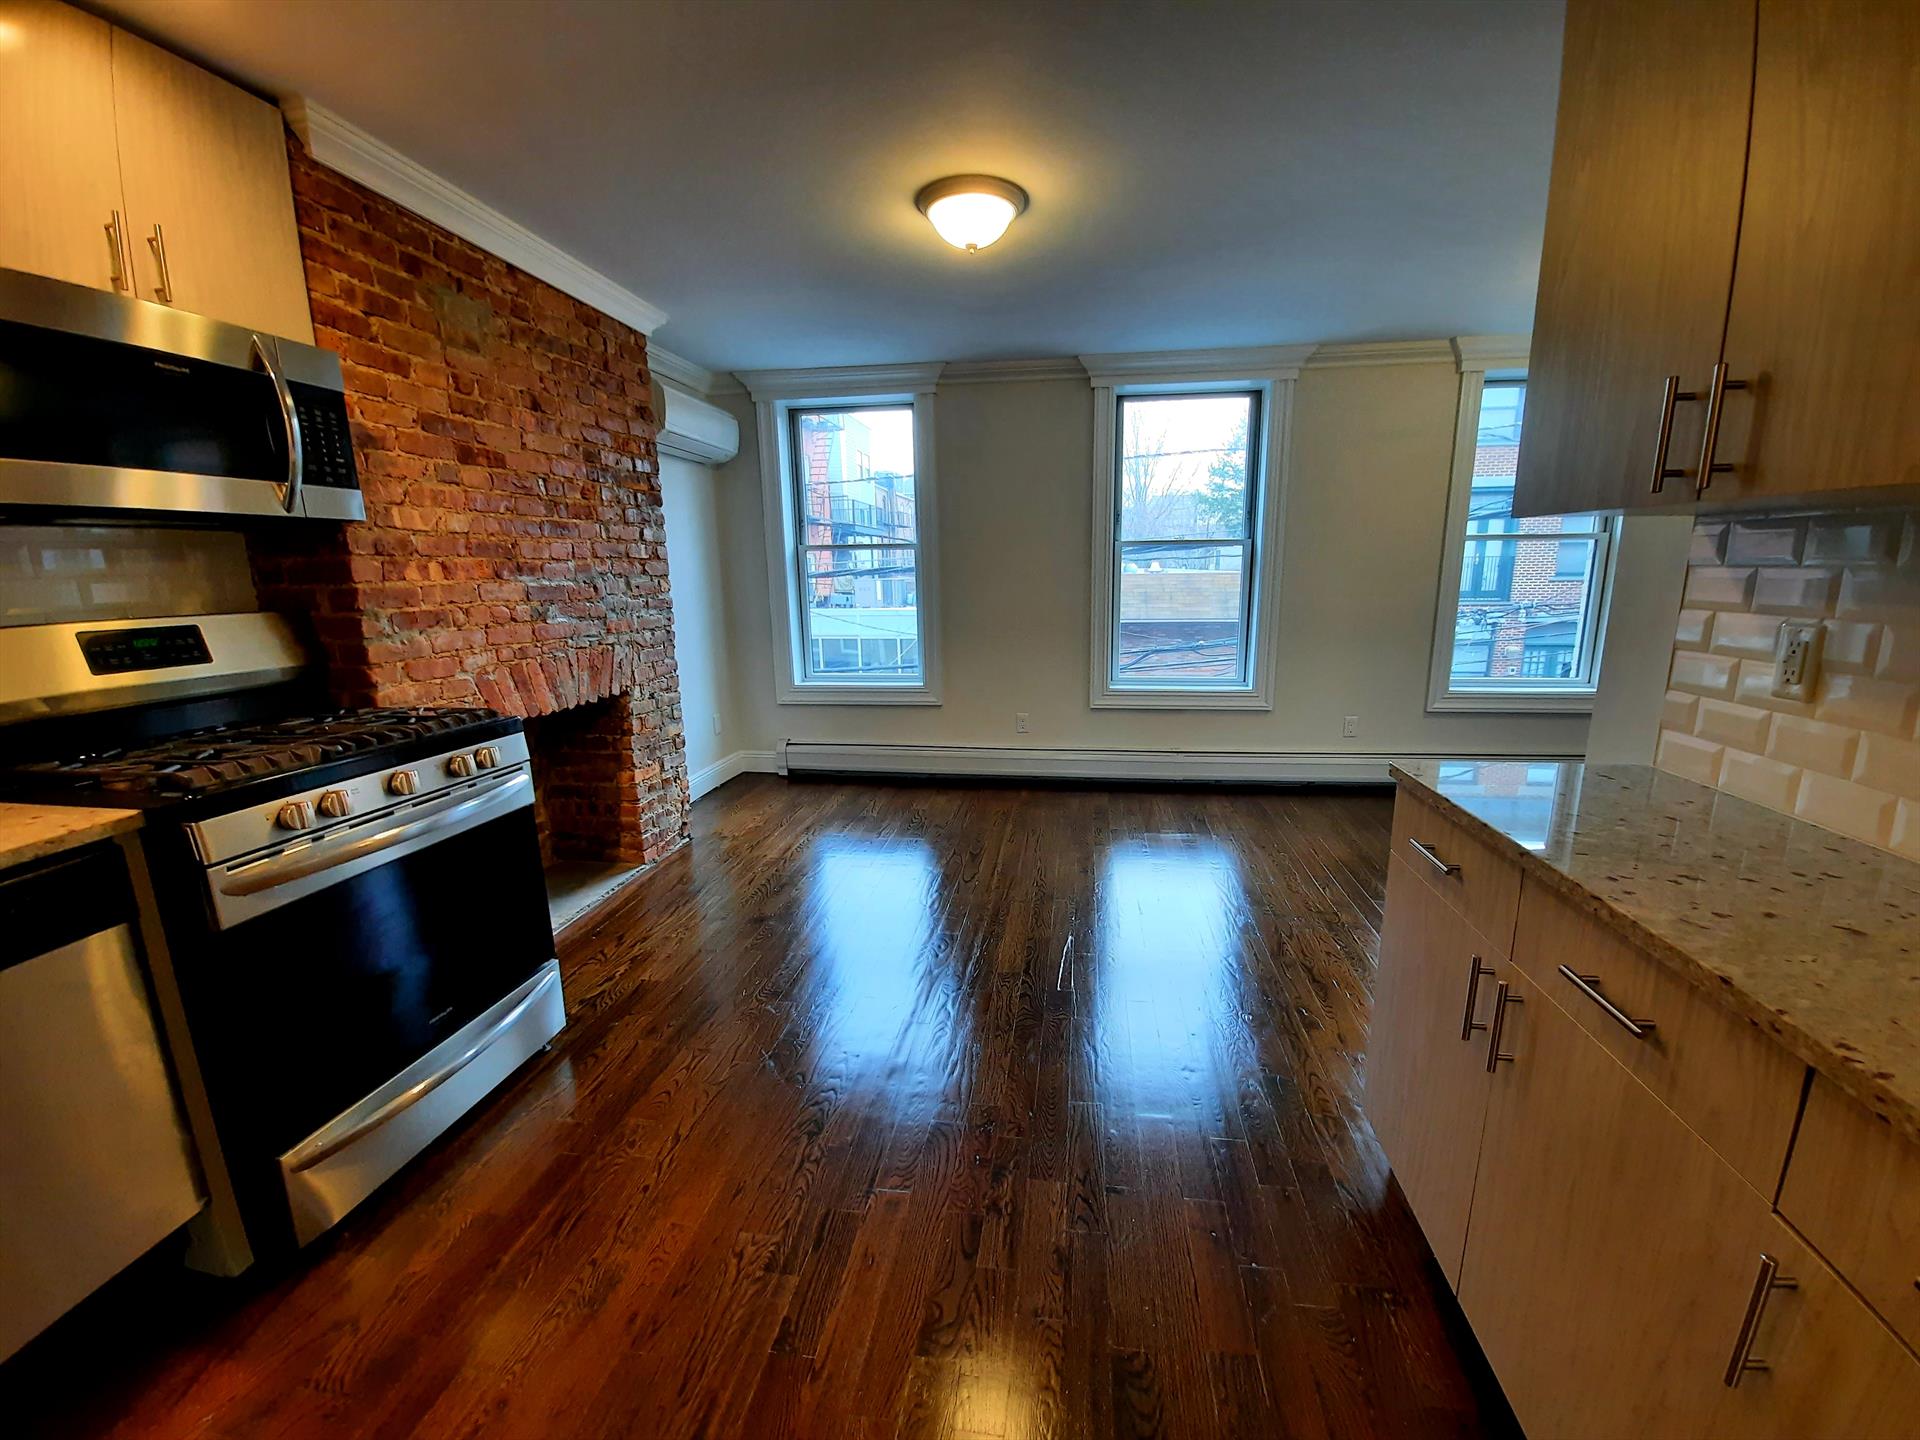 Move into this renovated Midtown Hoboken 2 BR rental located close to the waterfront. Features: great natural light, hardwood floors throughout, modern kitchen with granite counter tops, stainless steel refrigerator, gas stove, microwave, and dishwasher, living room with exposed brick, two bedrooms with closets (BR1: 9.4' x 10' / BR2: 8.4' x 7.7'), full bathroom with bathtub, private washer / dryer, common yard, conveniently located close to restaurants, retail boutiques, the waterfront, parks, pubs, and public transportation to NYC. Tenant pays their own heat, hot water, gas, and electricity. AVAILABLE APRIL 1st or sooner. NO PETS. To make this great rental yours: $3528 (1st months rent), $5292 (security deposit), $3528 (broker fee), $65 credit check per adult. 